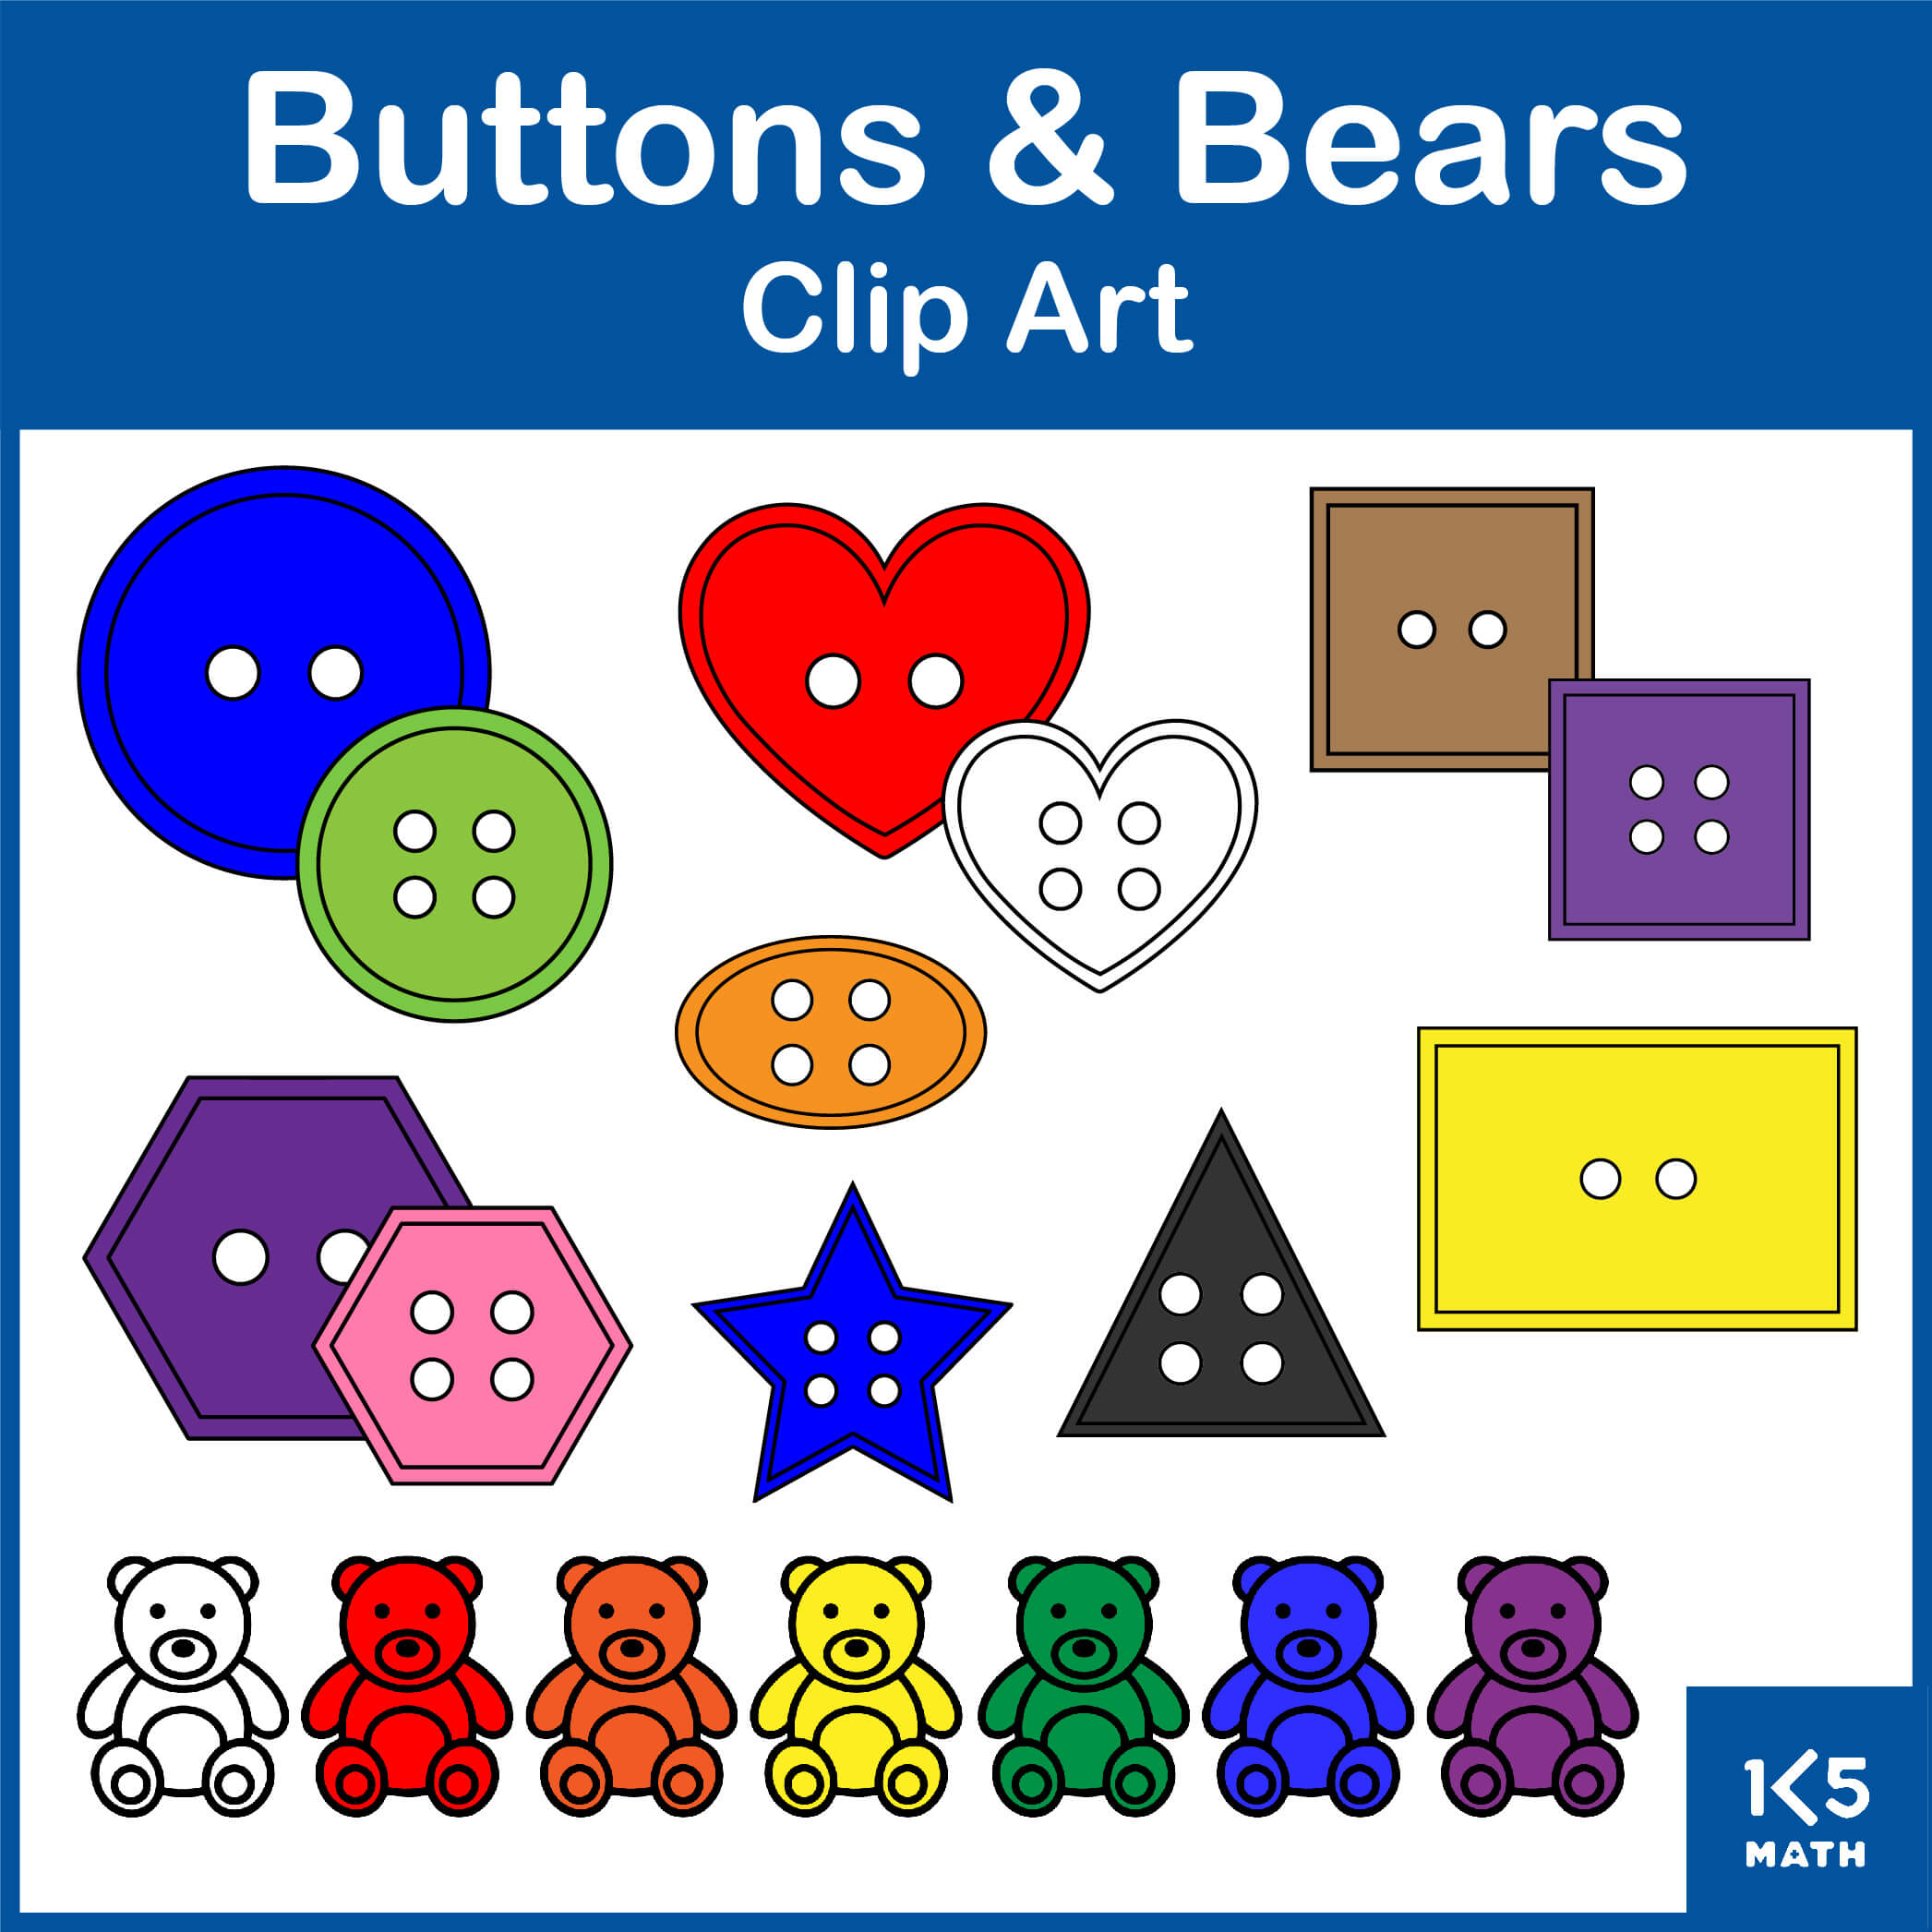 Buttons and Bears Clip Art